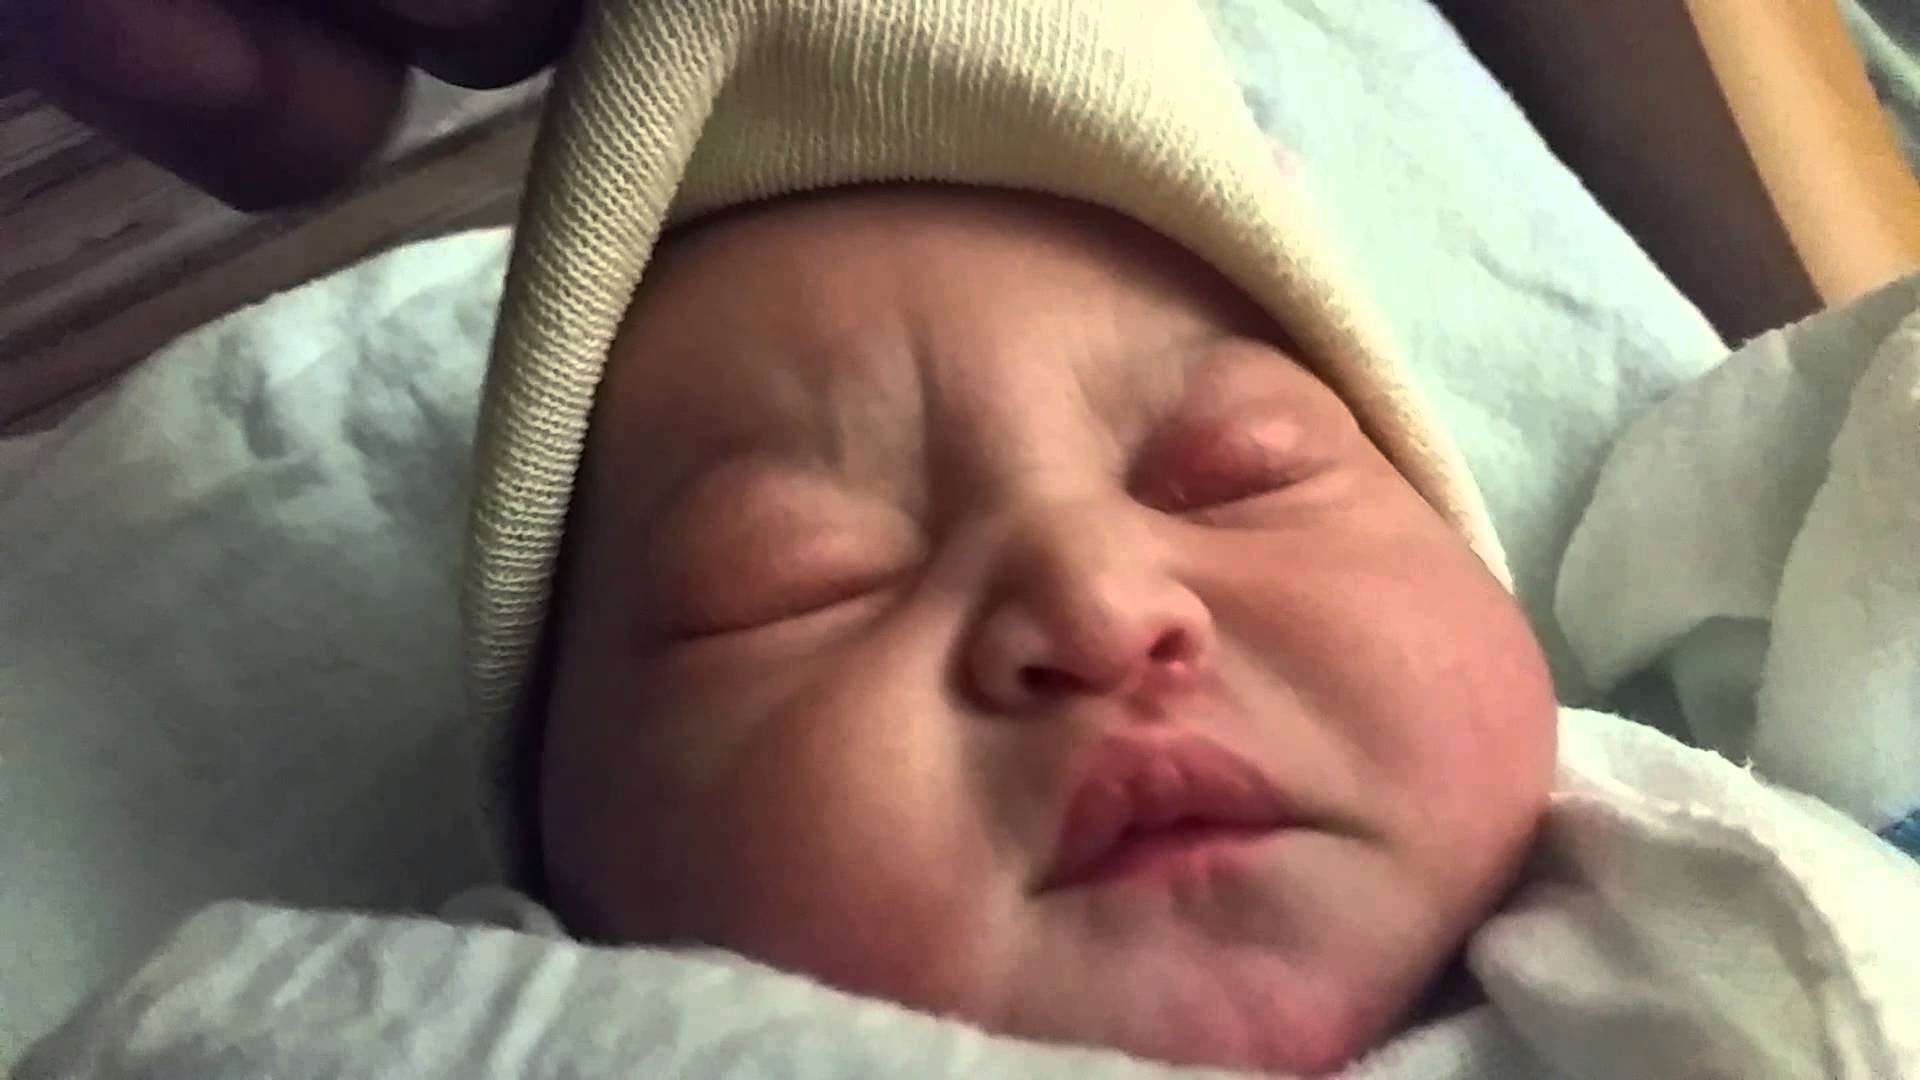 New born baby selena sleeping with a mad face blowing kisses - YouTube